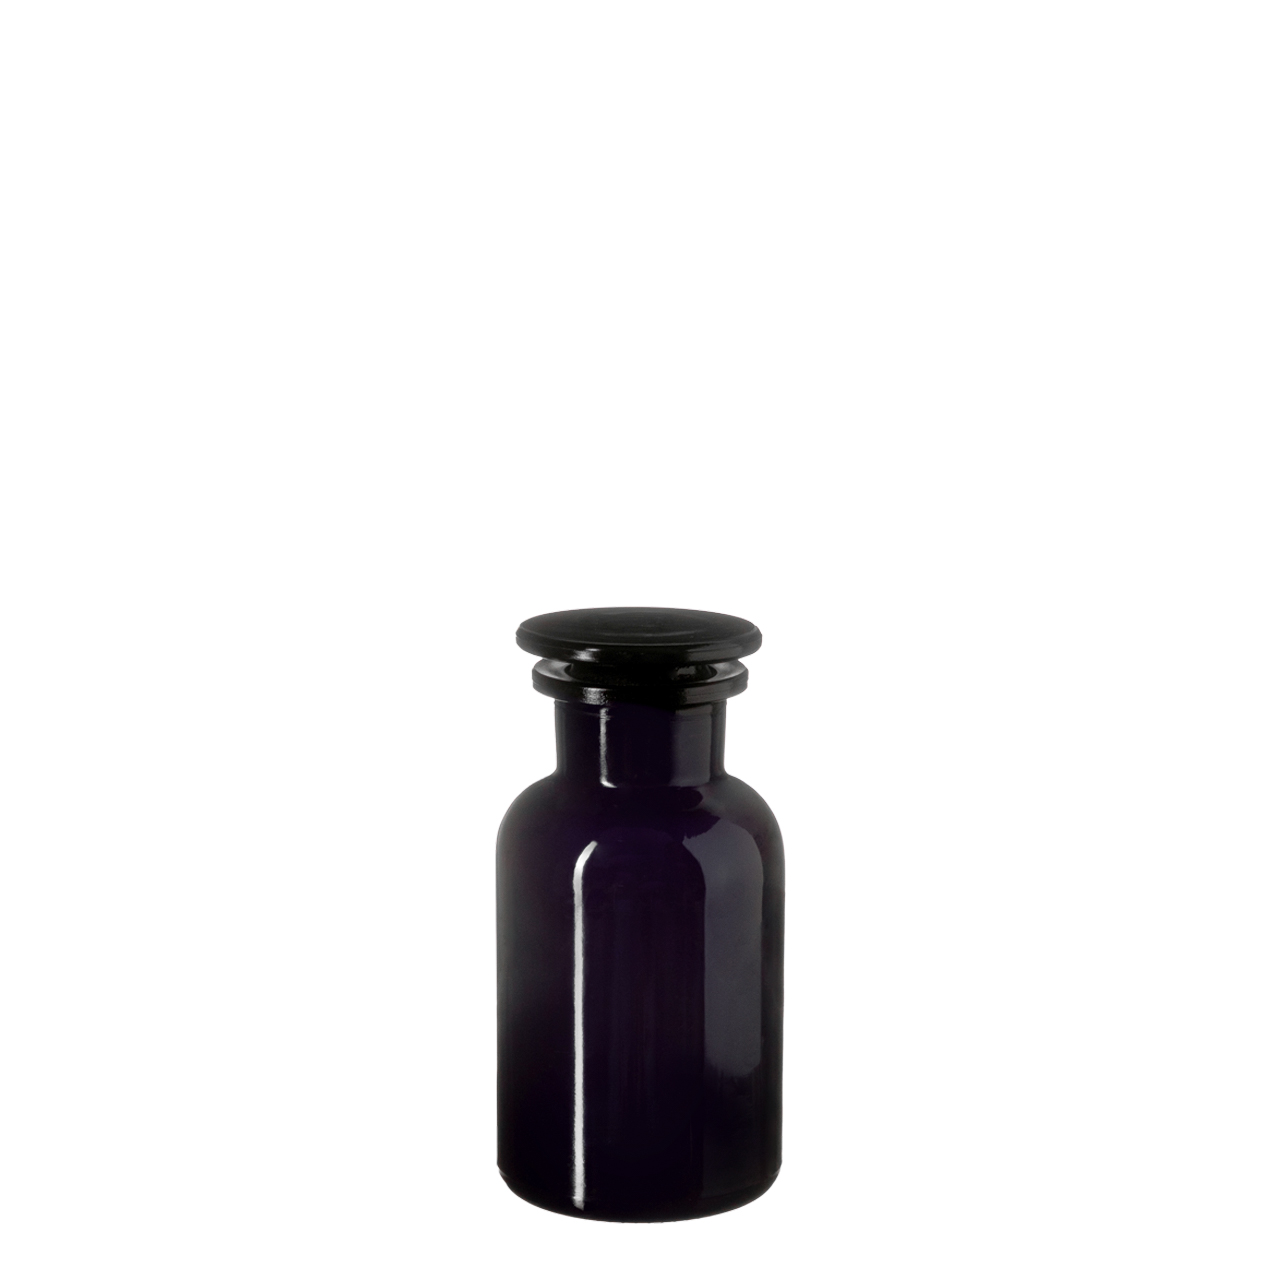 Apothecary jar Libra 100 ml, grinded glass stopper, Miron